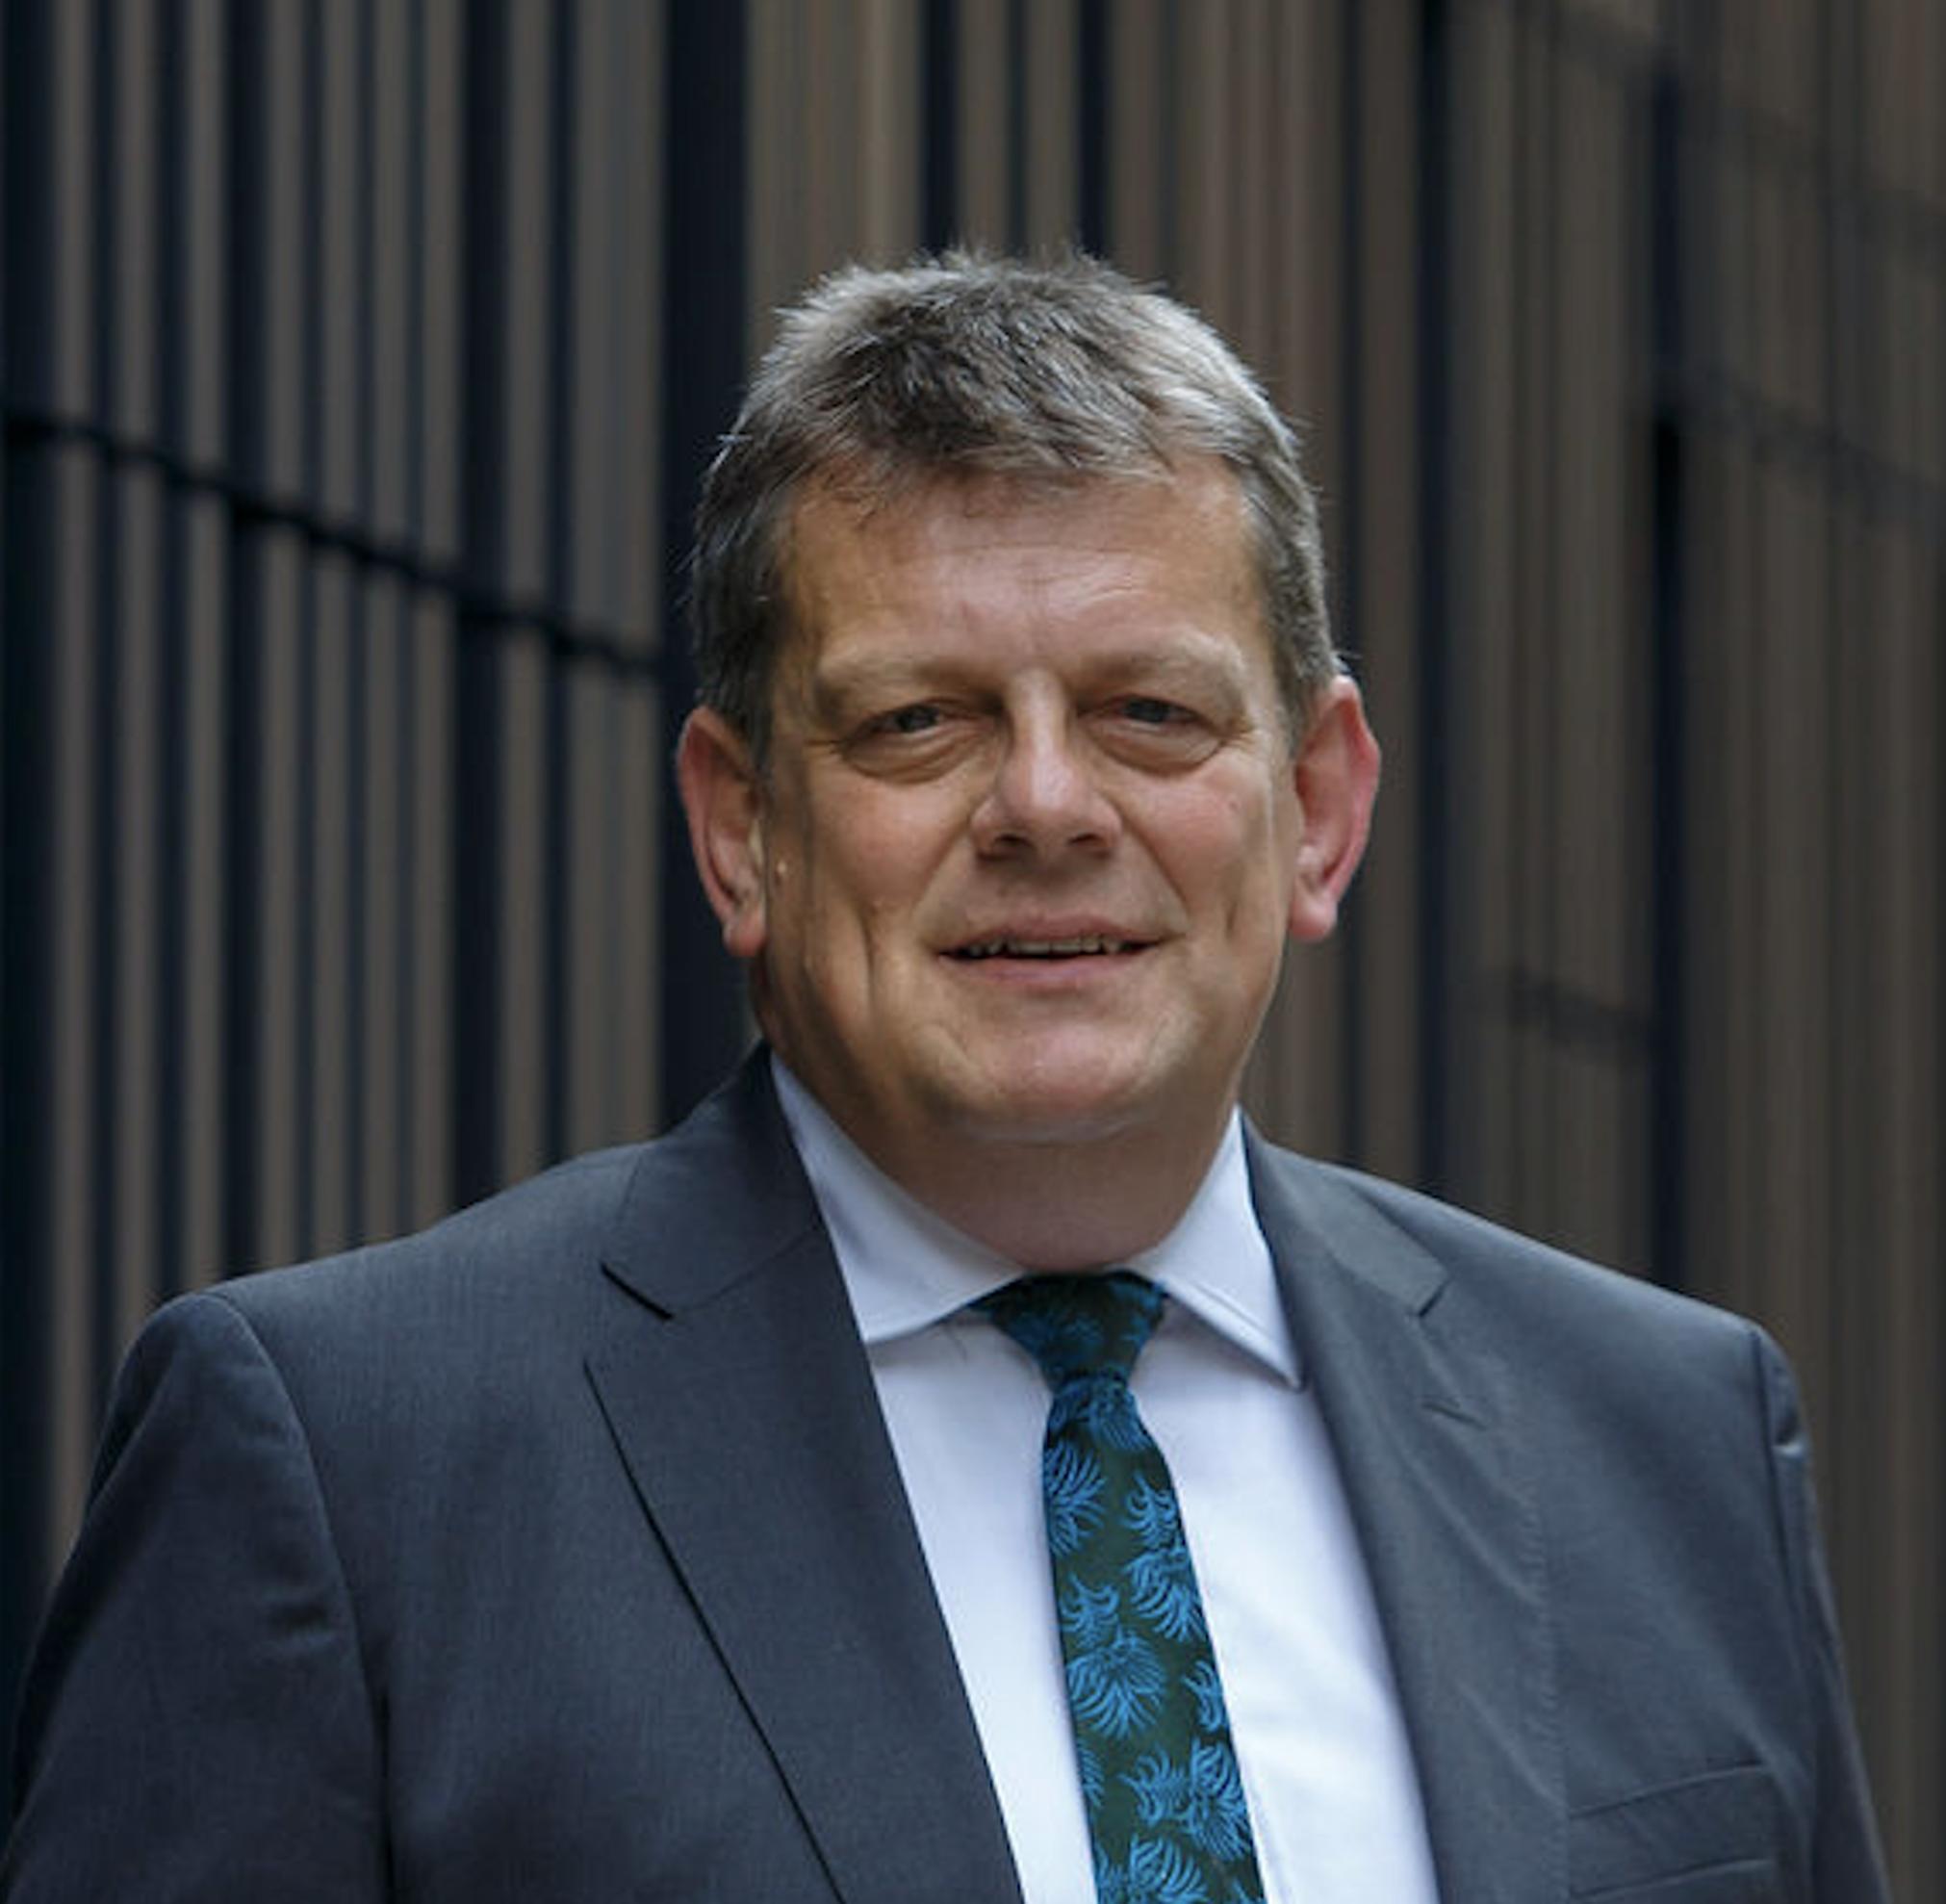 Transport for the North CEO Martin Tugwell